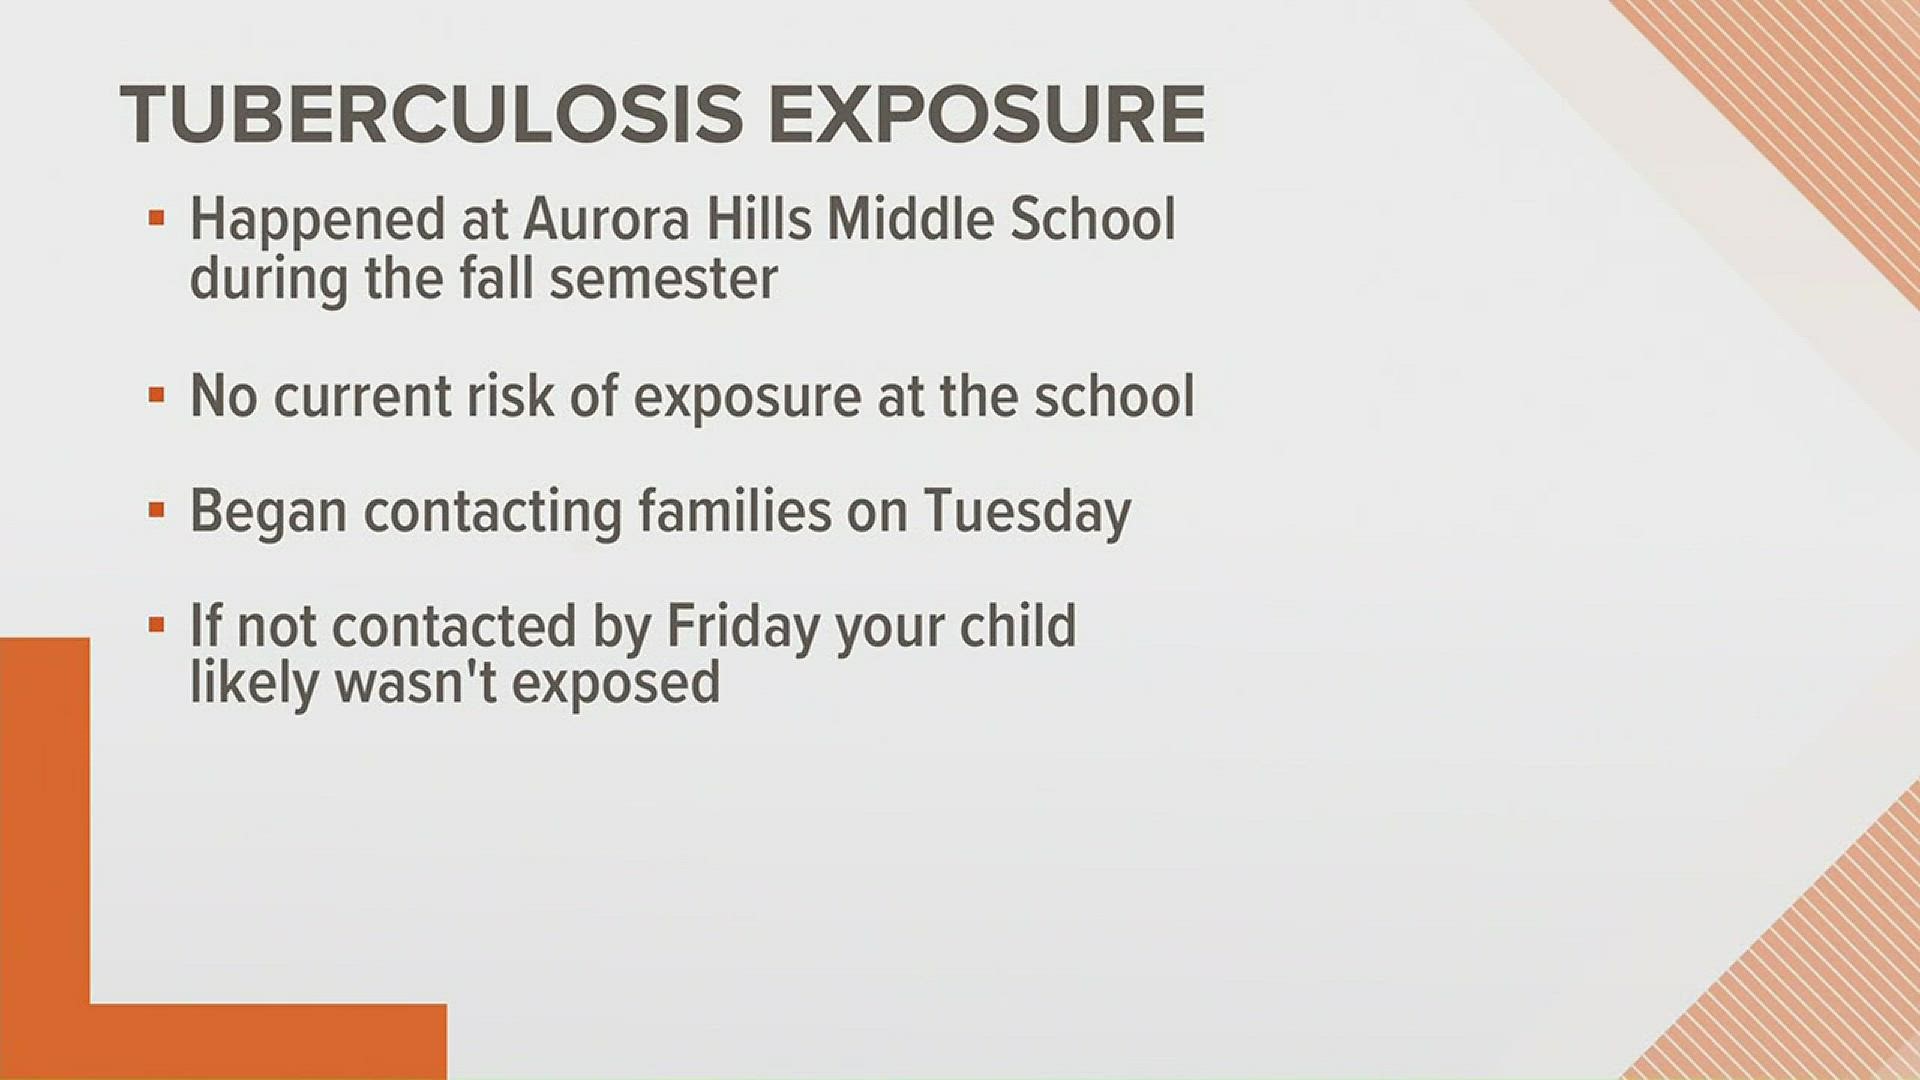 An expert from Denver Public Health talks about Tuberculosis after word came that students and staff at Aurora Hills Middle School may have been exposed to a person with the disease.